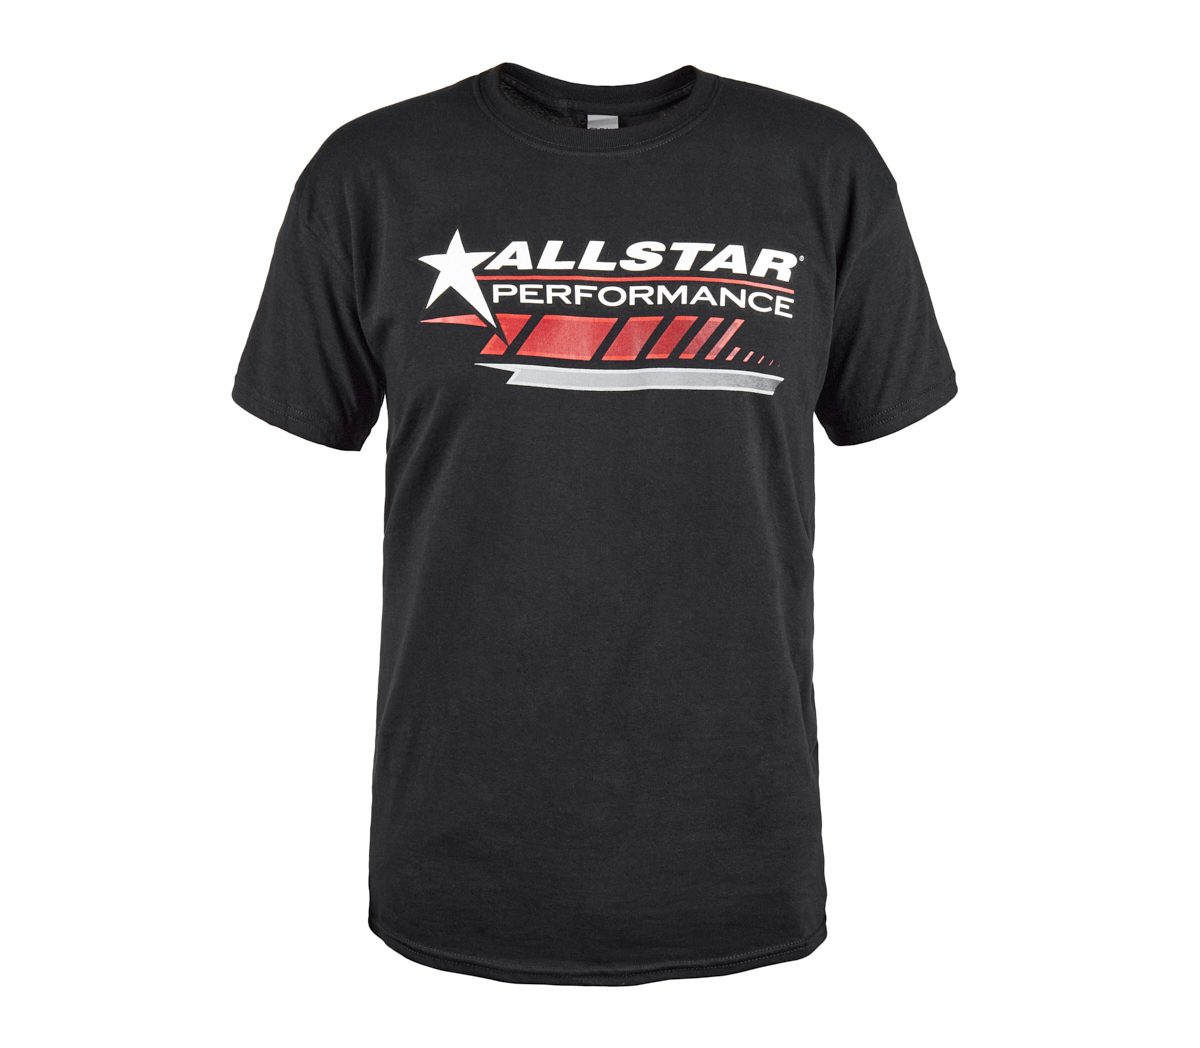 Allstar T-Shirt Black w/ Red Graphic Small